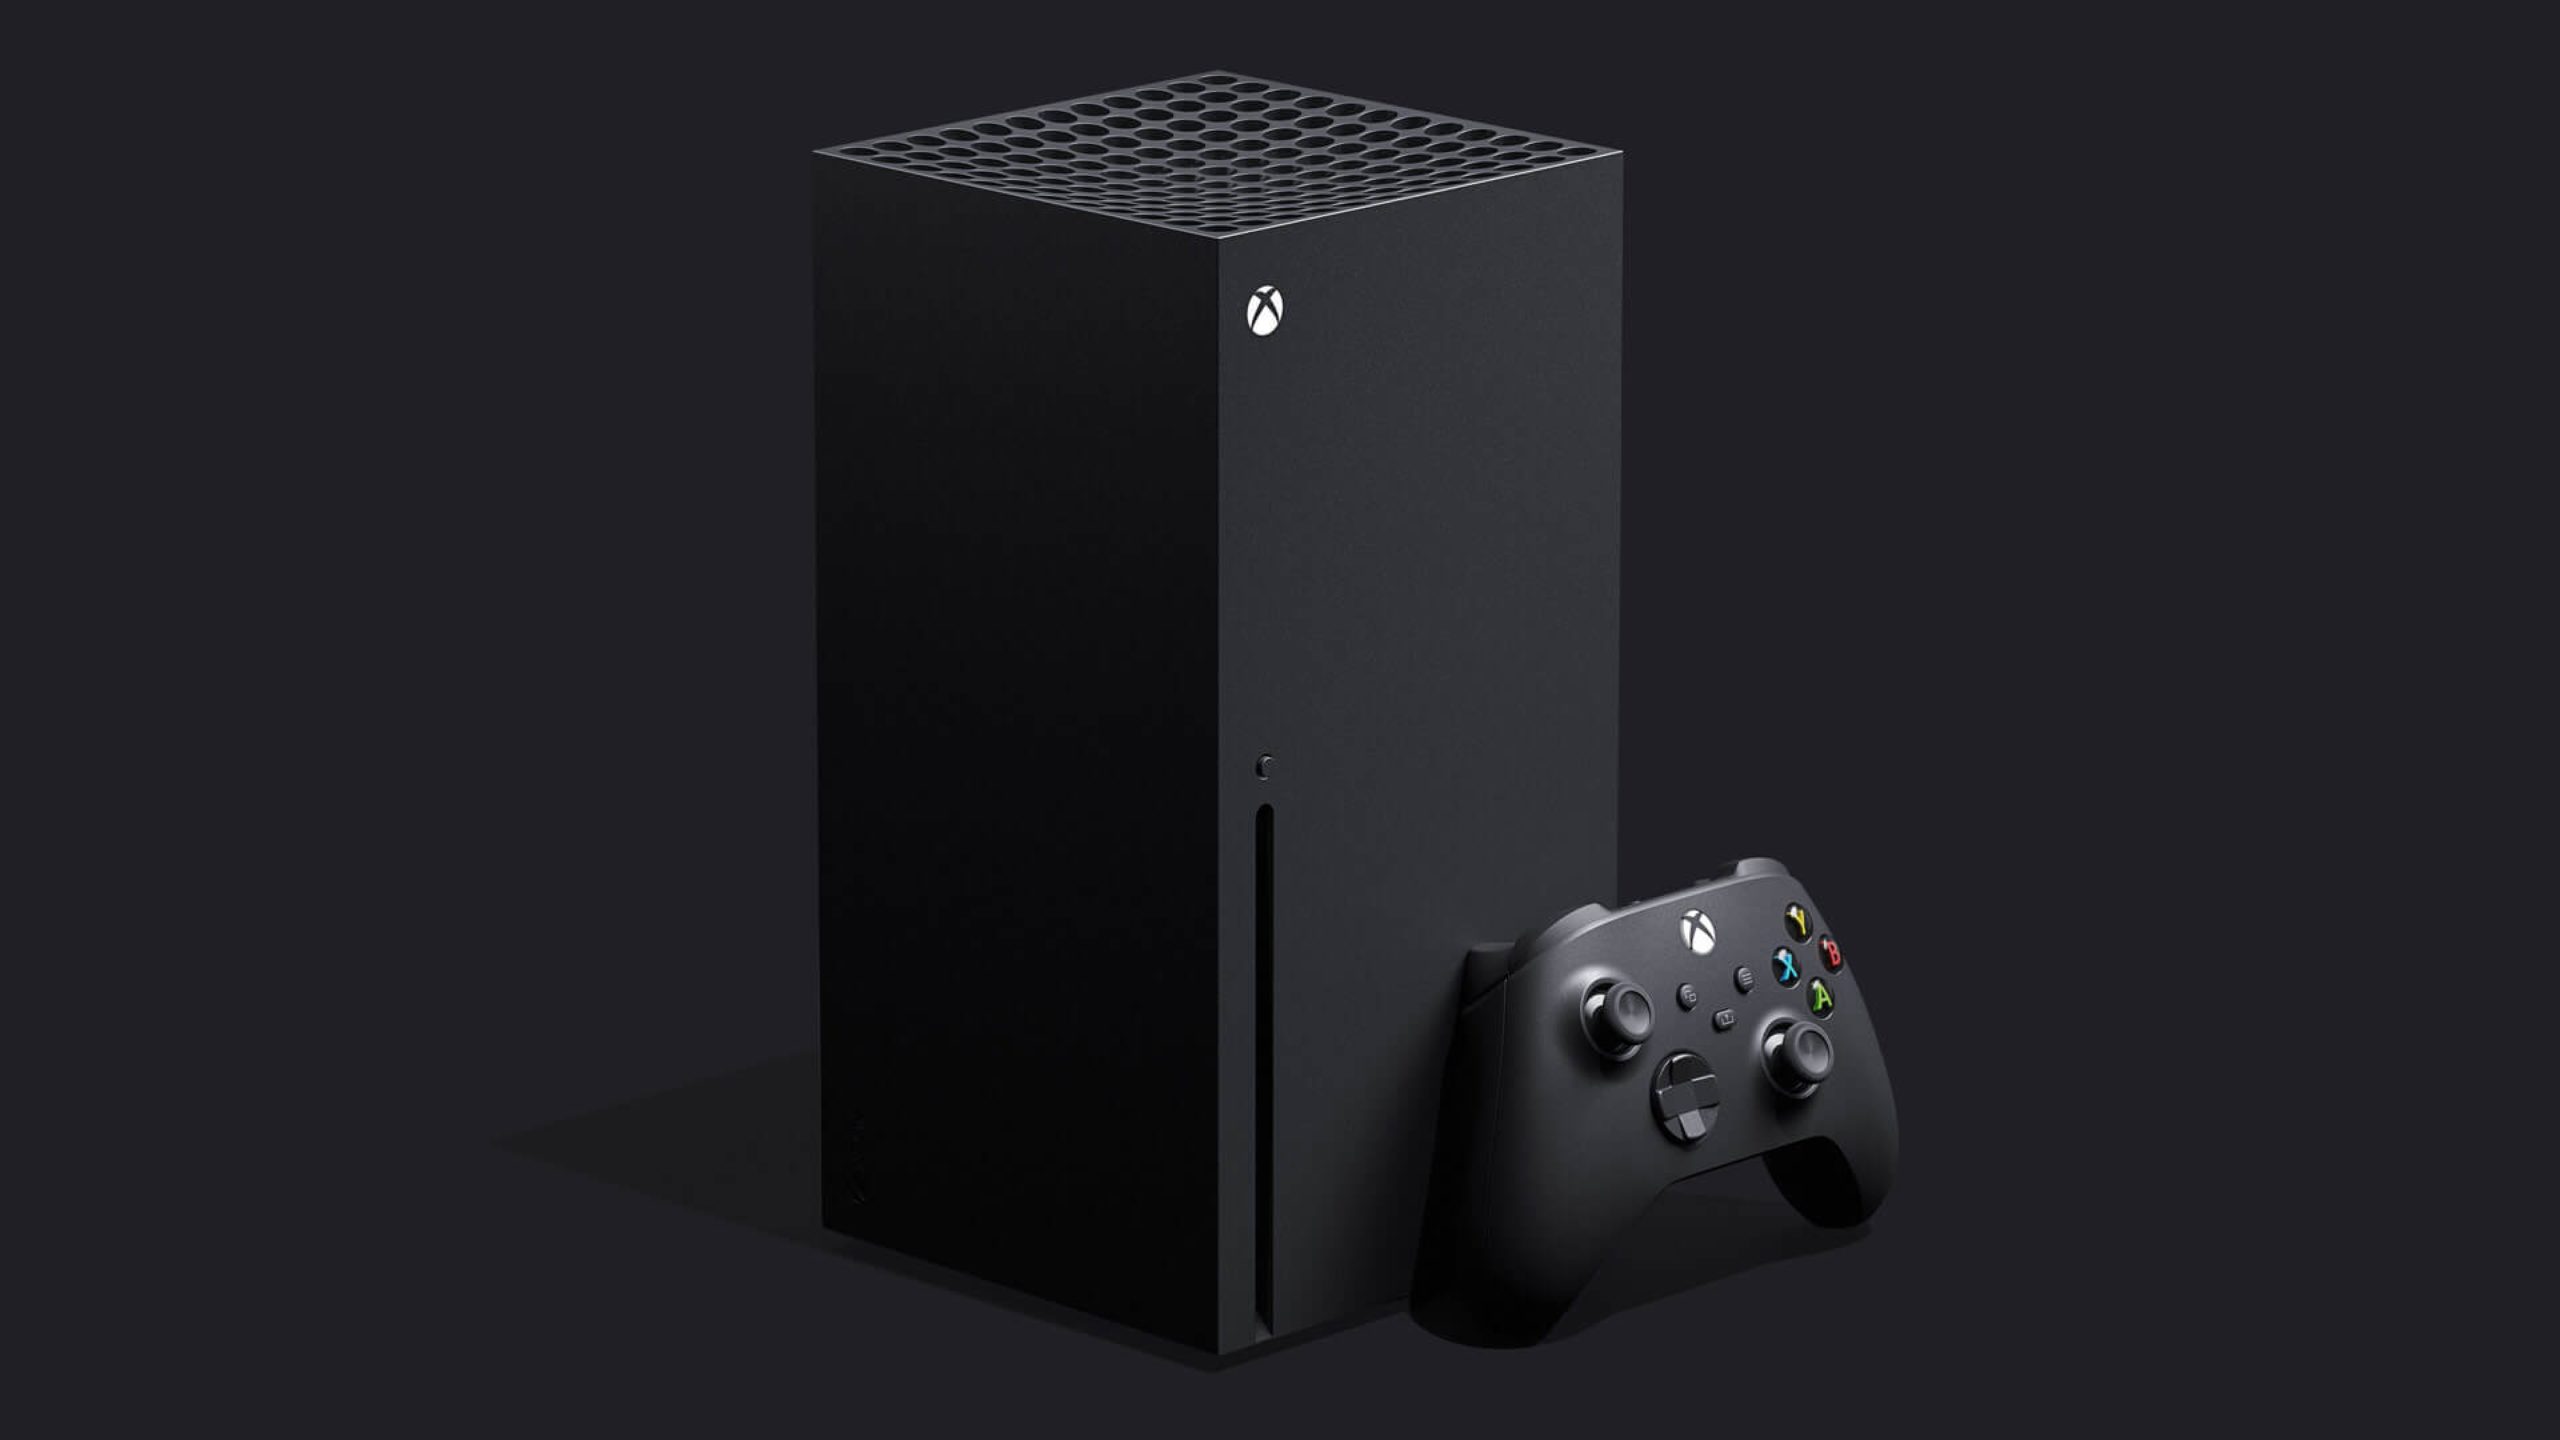 how much will the new xbox scarlett cost